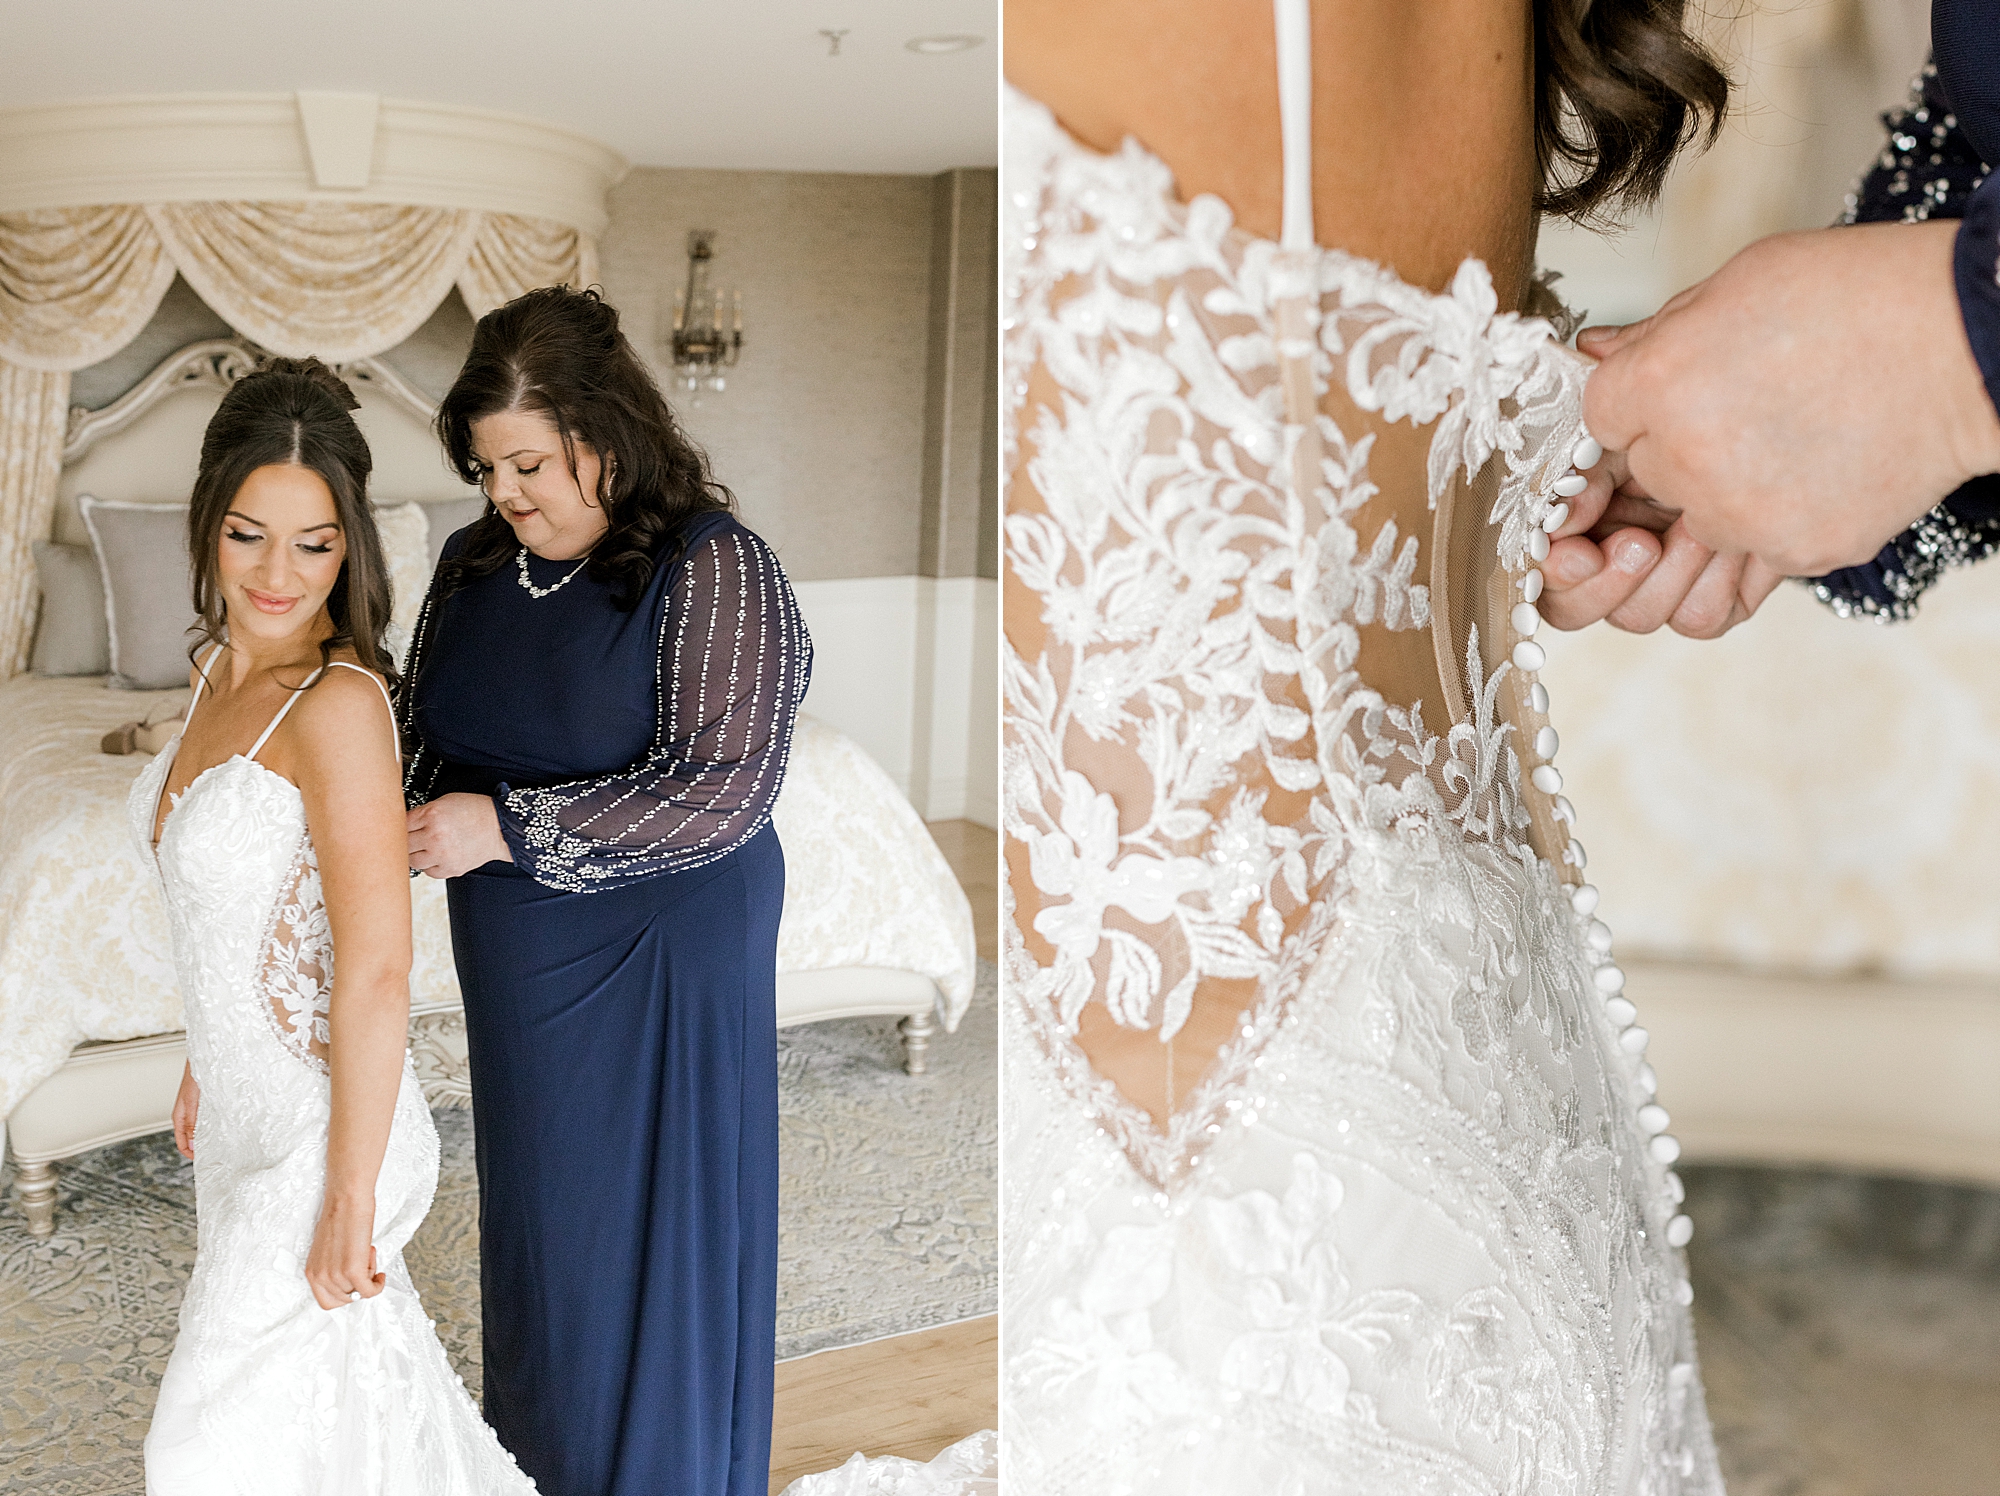 mother in navy dress helps bride into wedding gown in suite at Bonnet Island Estate